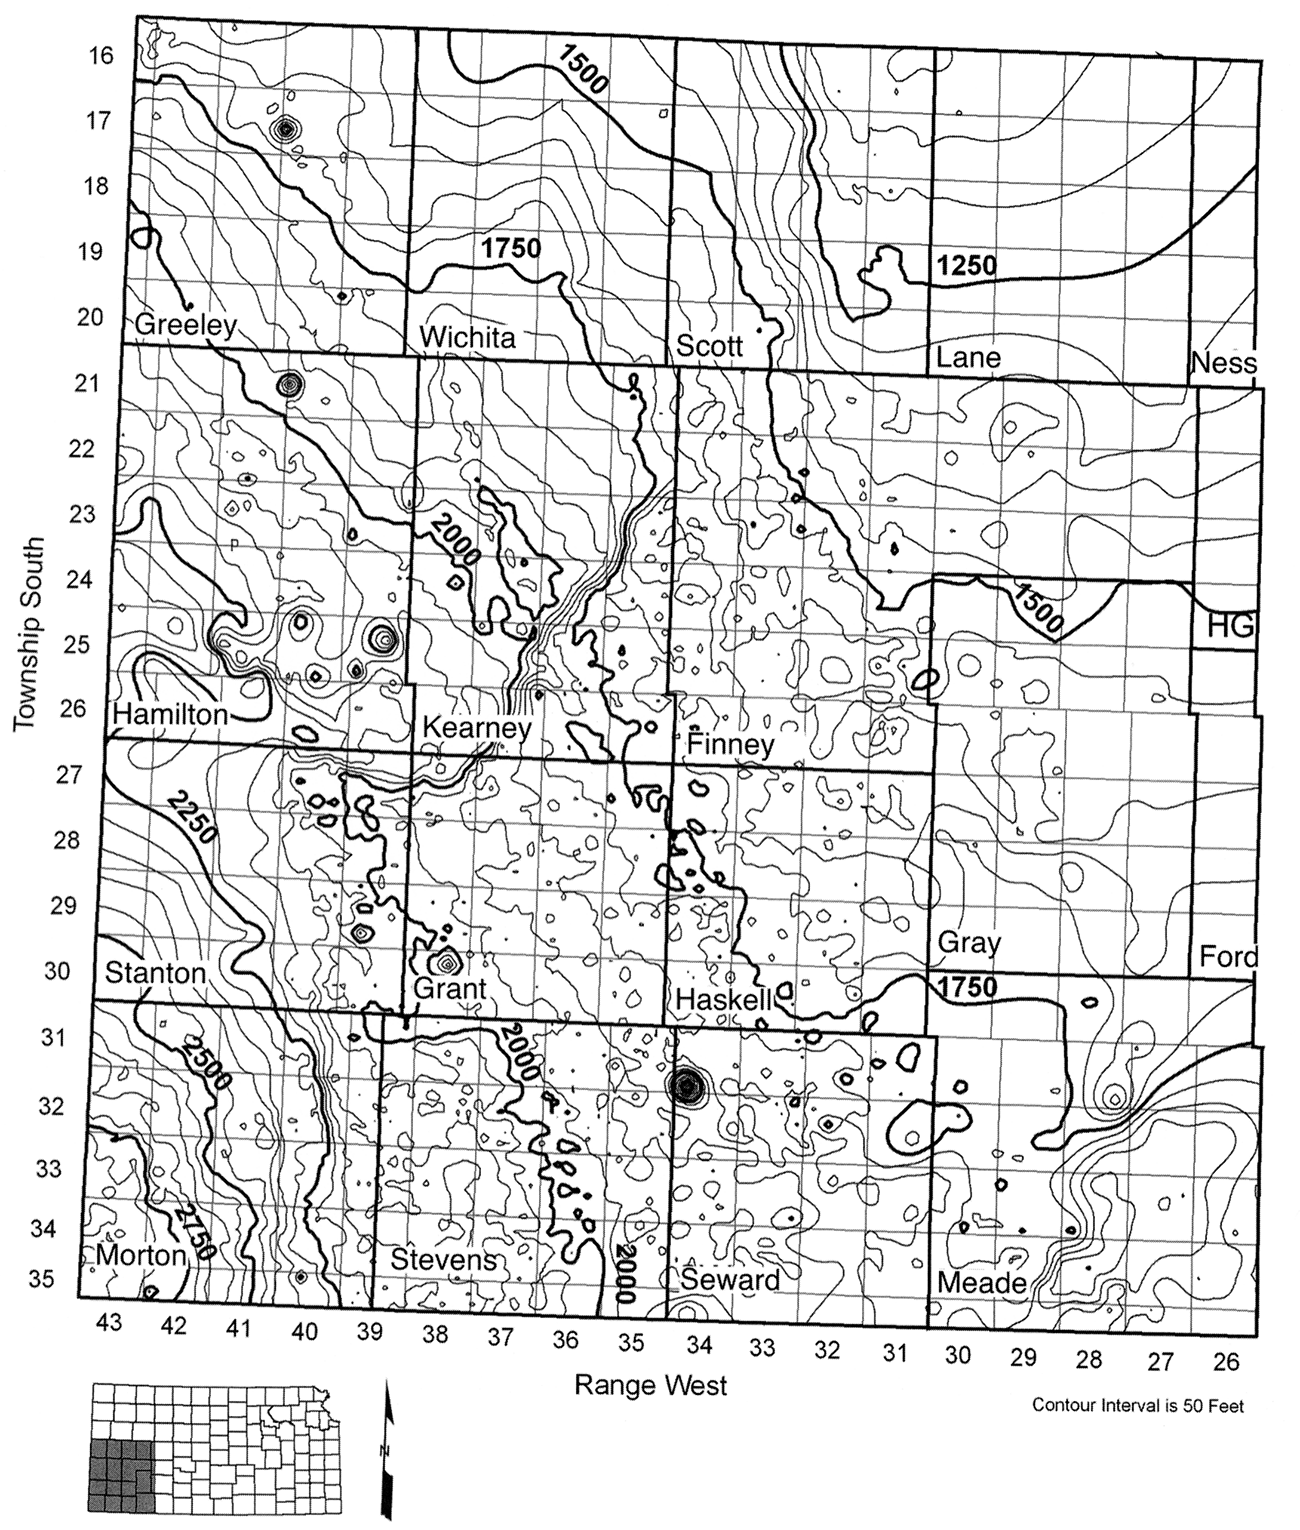 Elevation of the top of the Blaine Formation in the vicinity of the mapped trace Bear Creek fault on the 1995 USGS map of the elevation of the bedrock surface beneath the Ogallala aquifer in Hamilton, Stanton, Kearny, and Grant counties in southwest Kansas.